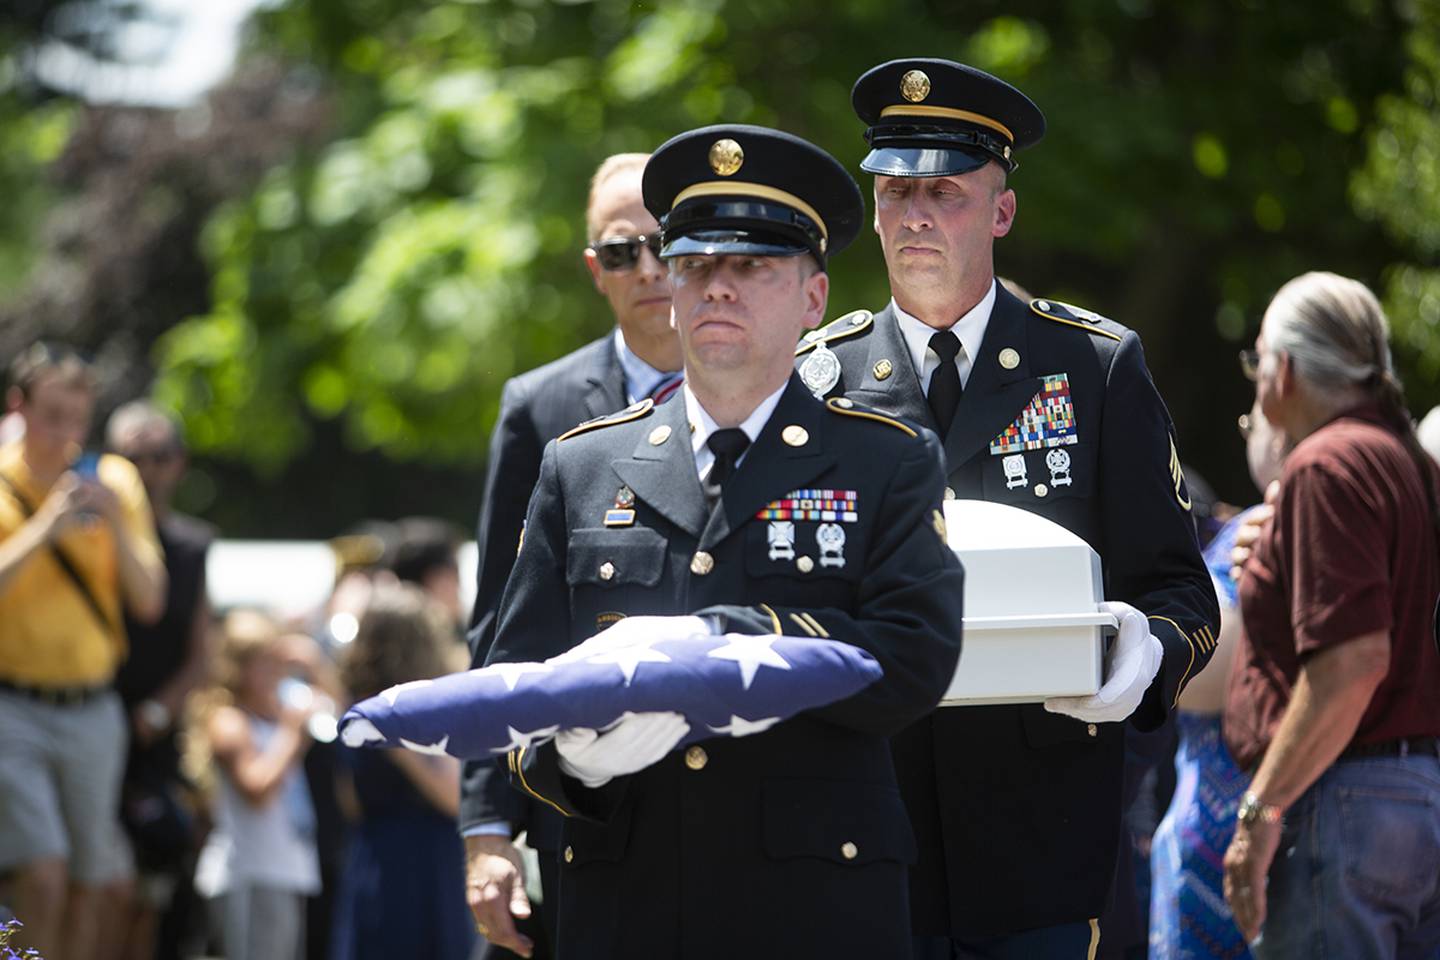 U.S. Army members carry a folded flag along with the remains of Vietnam War veteran Wayne Wilson during his memorial service at the Silverbrook Cemetery in Niles, Mich. on Wednesday, July 17, 2019